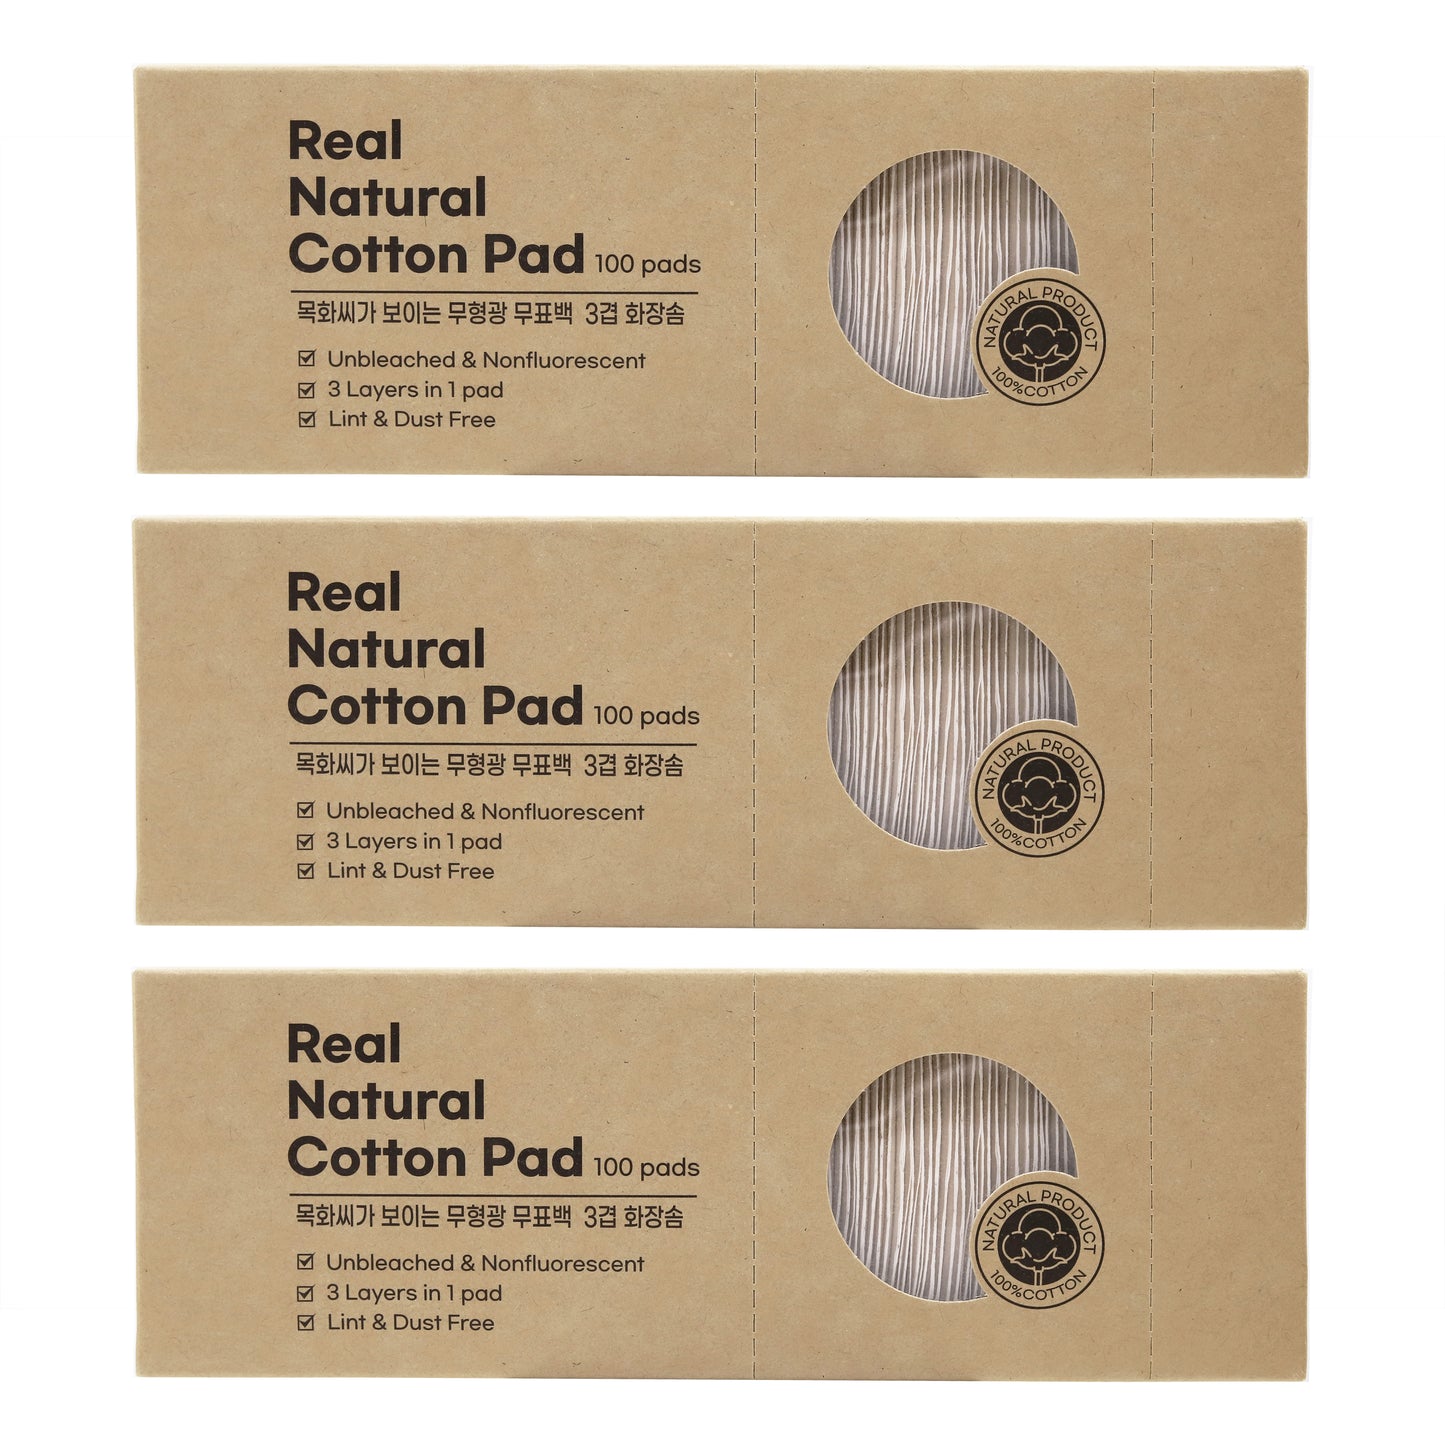 Unbleached & Non-fluorescent 3Layered Cotton Pads 300 Count - Dual(Soft & Textured) Type